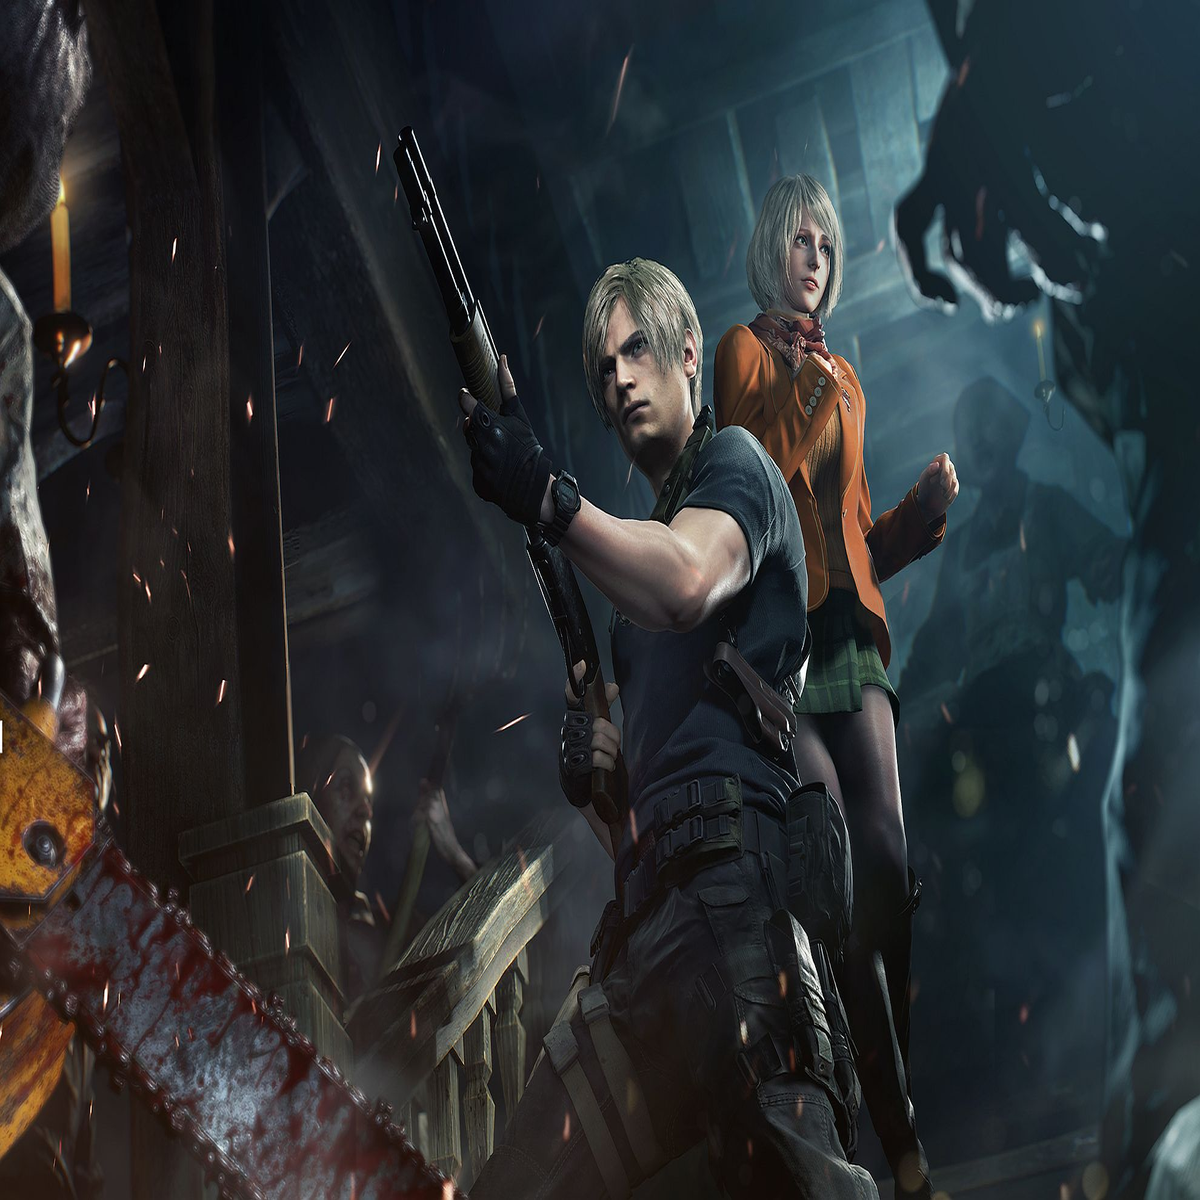 Resident Evil 4' Review: A bold remake that stands on its own : NPR